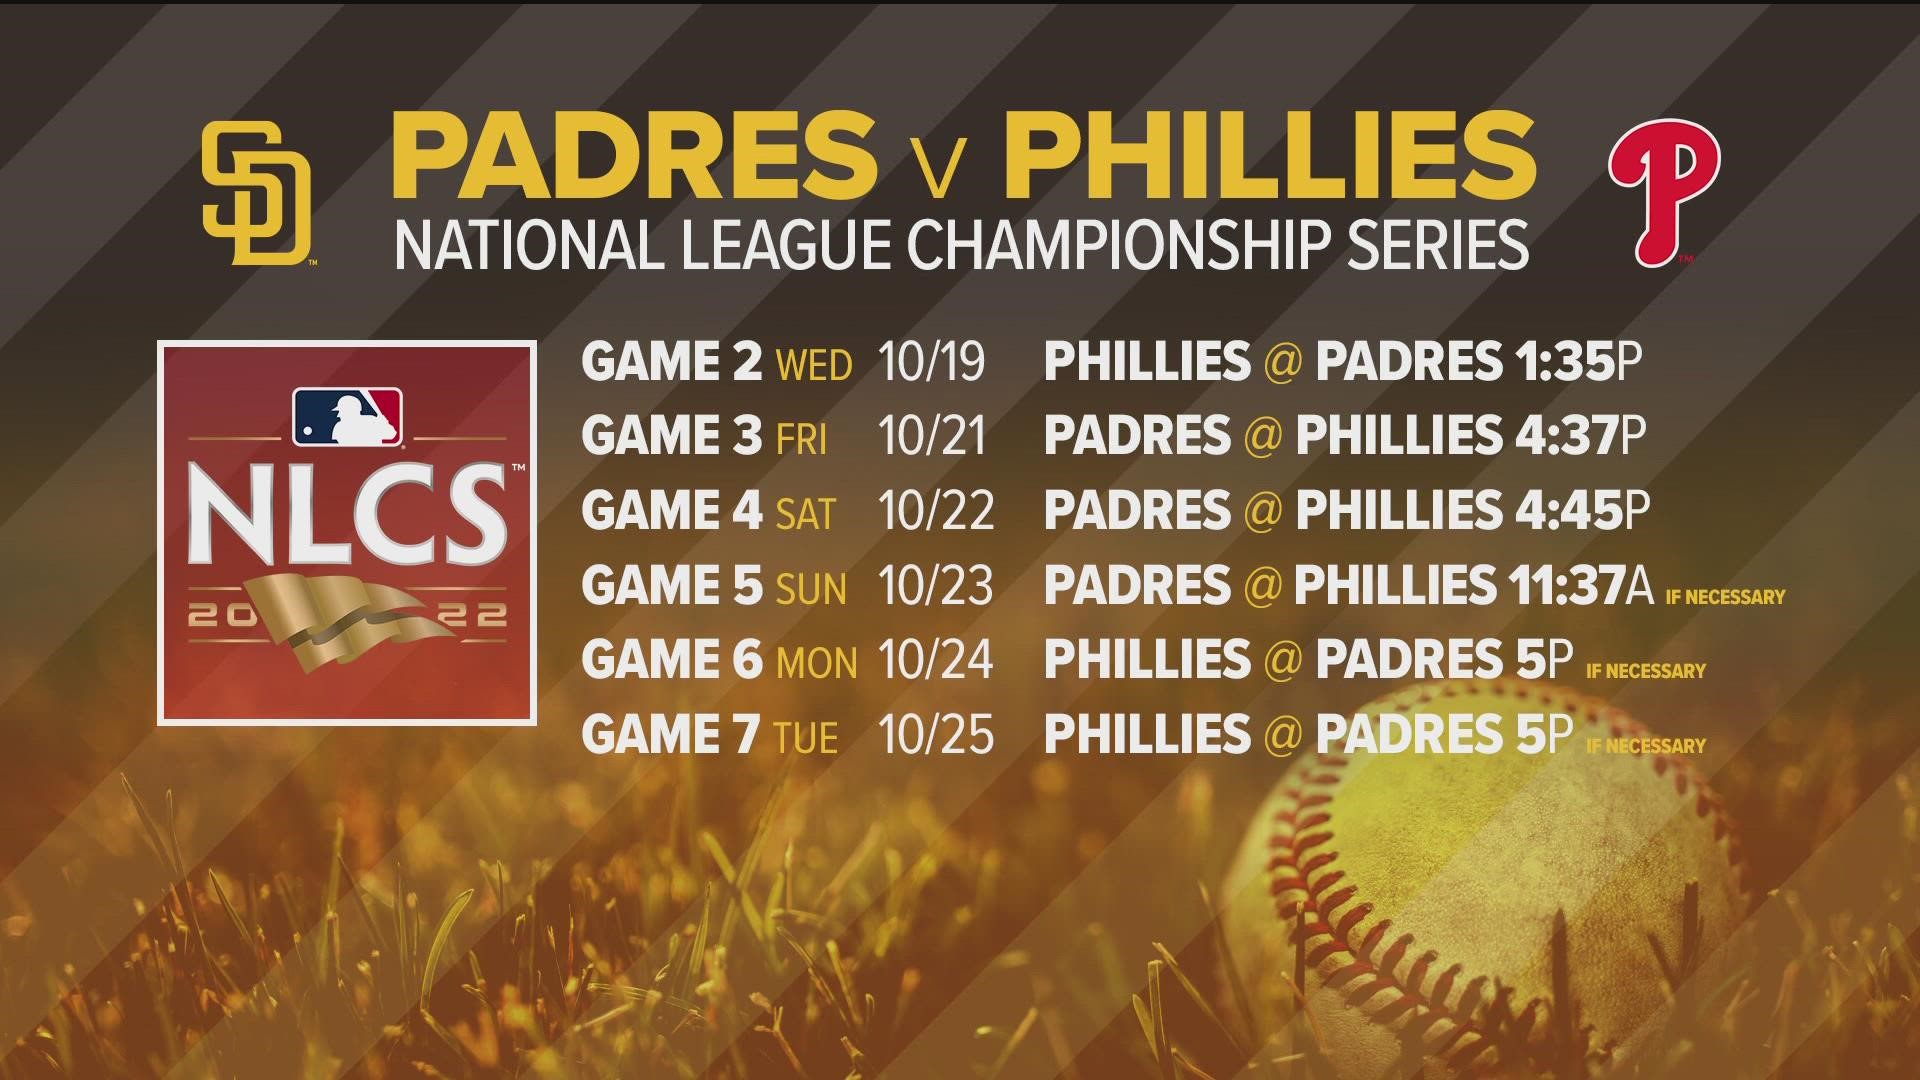 The Phillies pitchers held the Padres to a single hit in Game 1. Both teams will be back on the field Wednesday at 1:35 p.m. at Petco Park for Game 2.